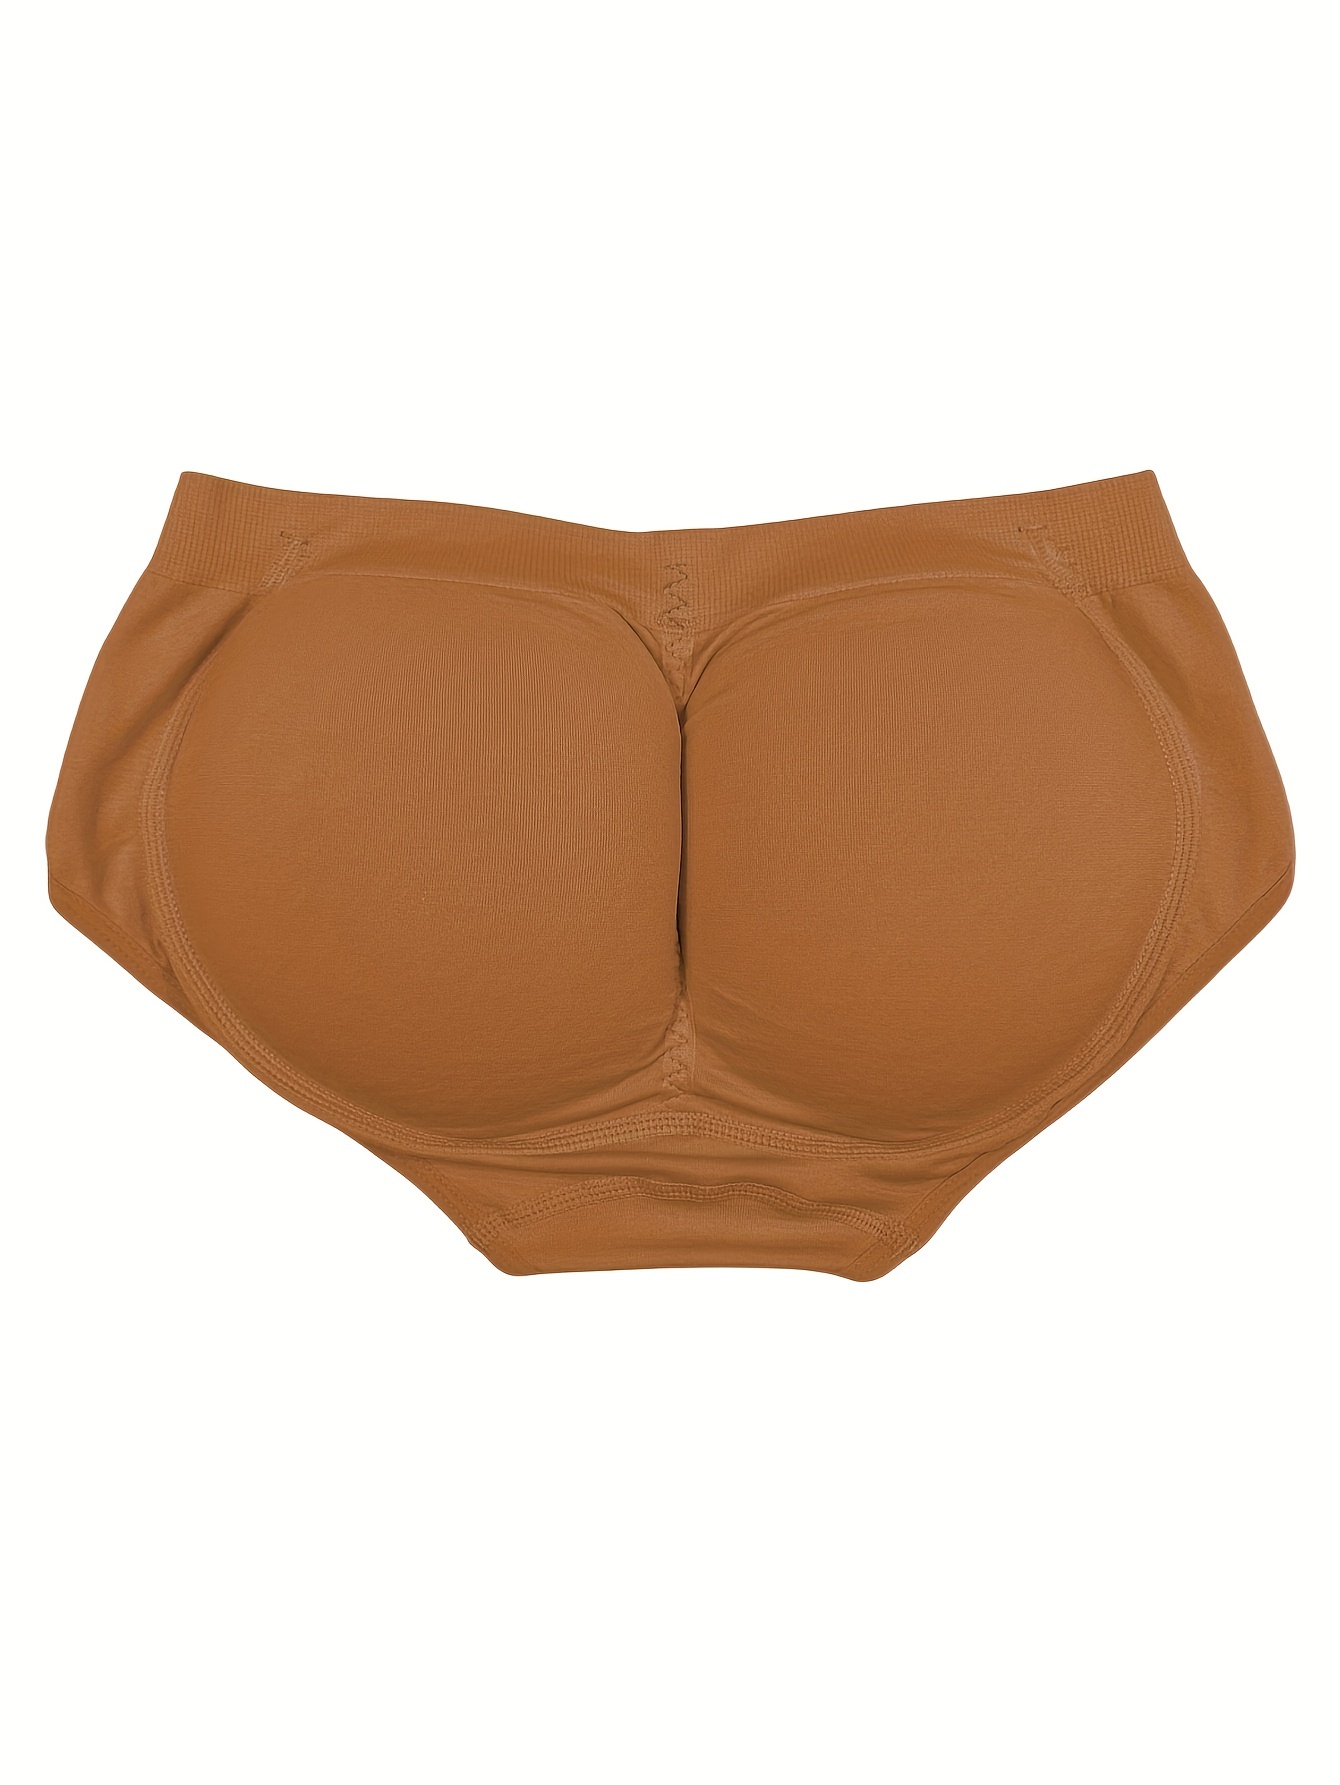 Breathable Butt Lifting Panties With Removable Padded Hips For